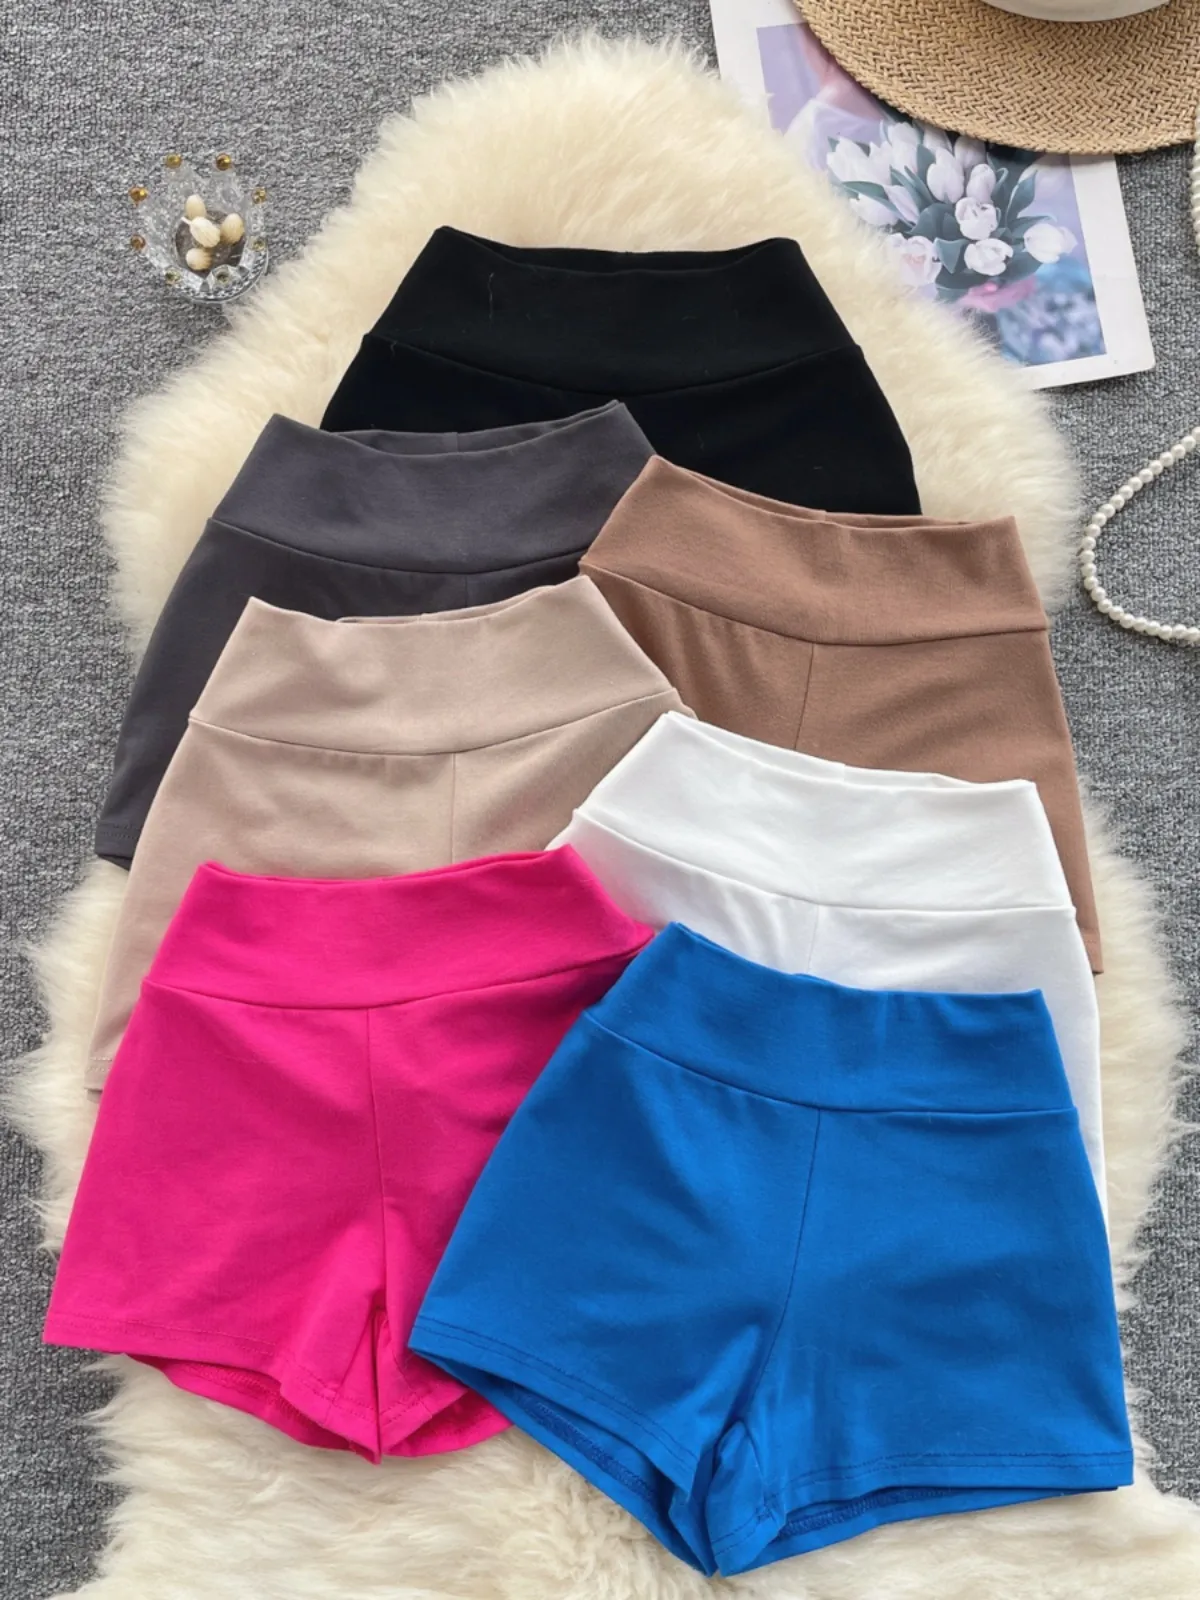 Summer New Elastic Slim Fit Versatile Casual Shorts for Women's Outwear Running Sports Show Body Yoga Pants Honey Peach Pants